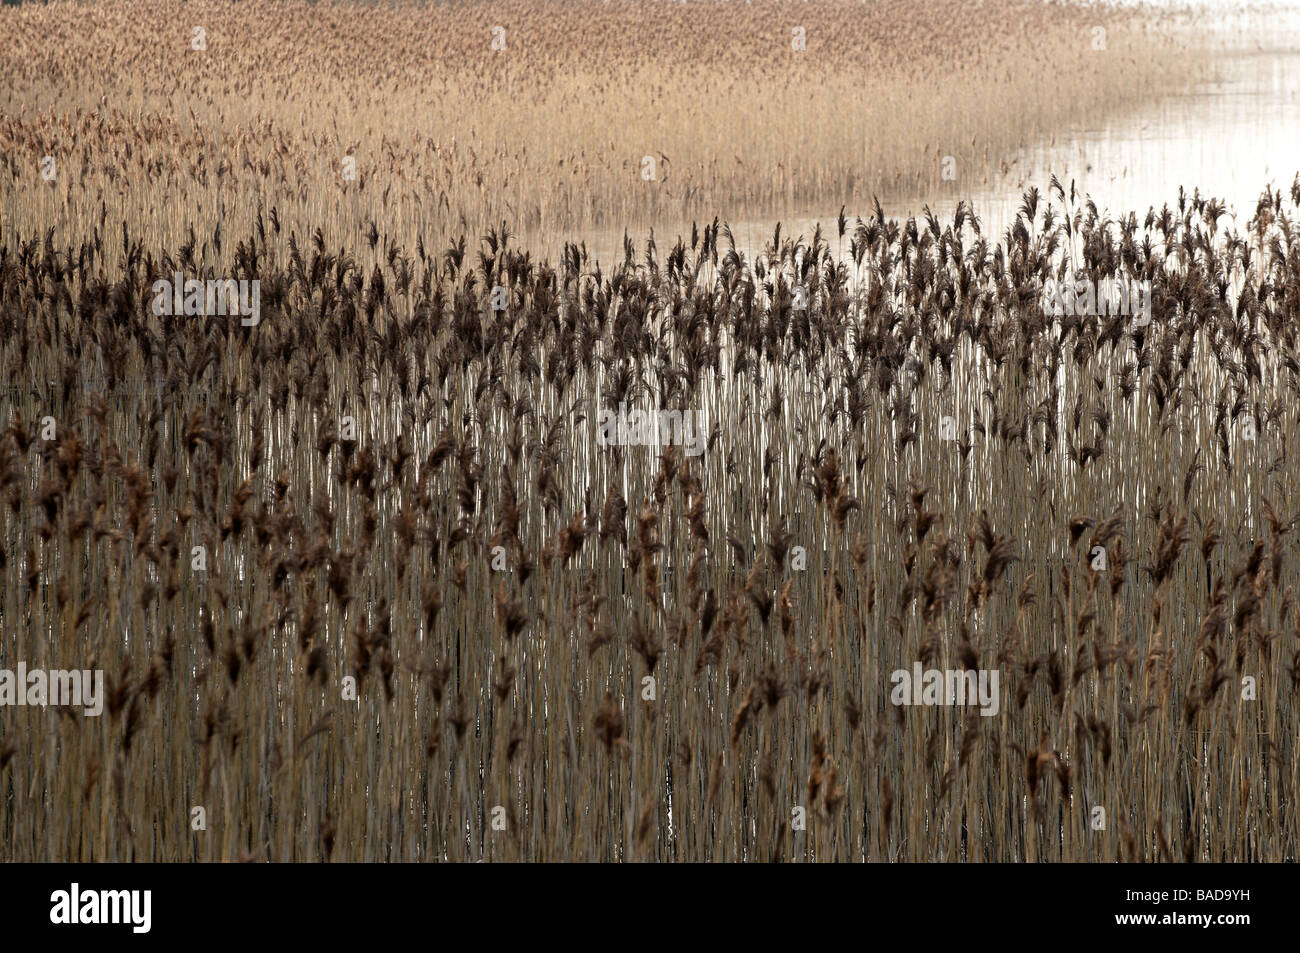 Reeds at the edge of a lake County Fermanagh Northern Ireland Stock Photo